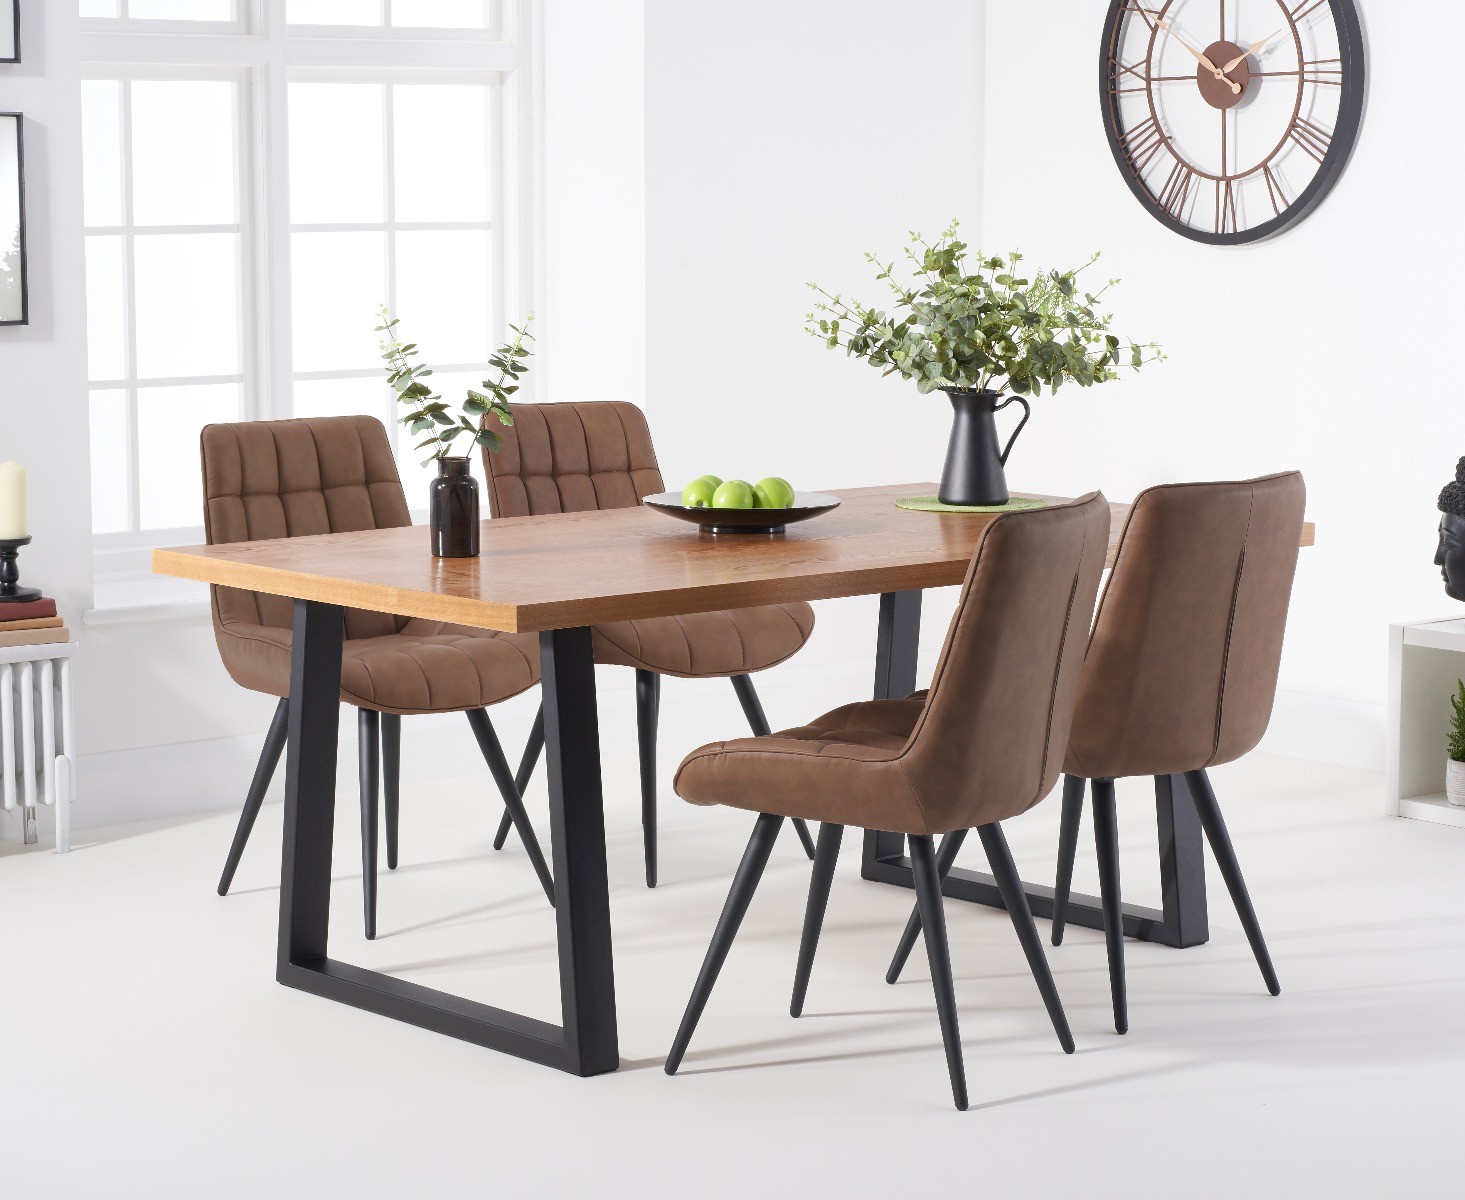 Urban 180cm Industrial Dining Table With 4 Brown Larson Chairs